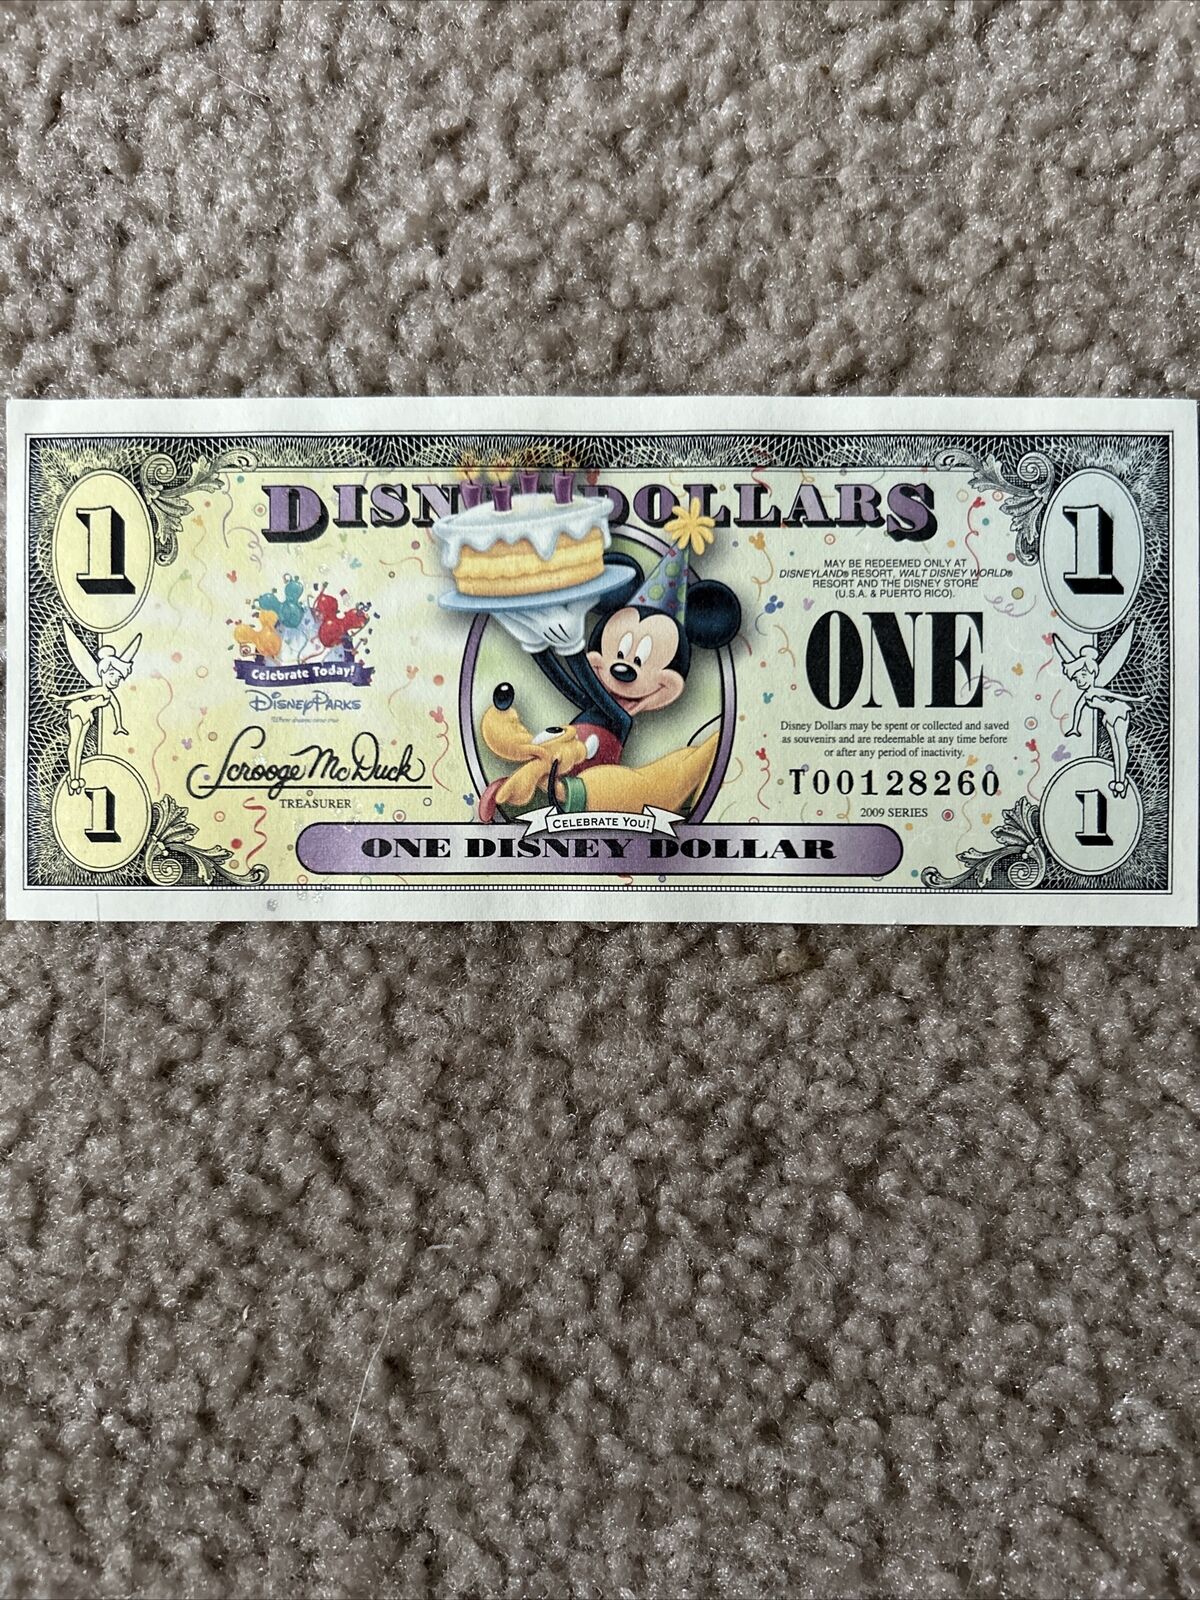 Disney Dollar $1 Mickey And Pluto, Celebrate You “T” Series 2009. Excellent